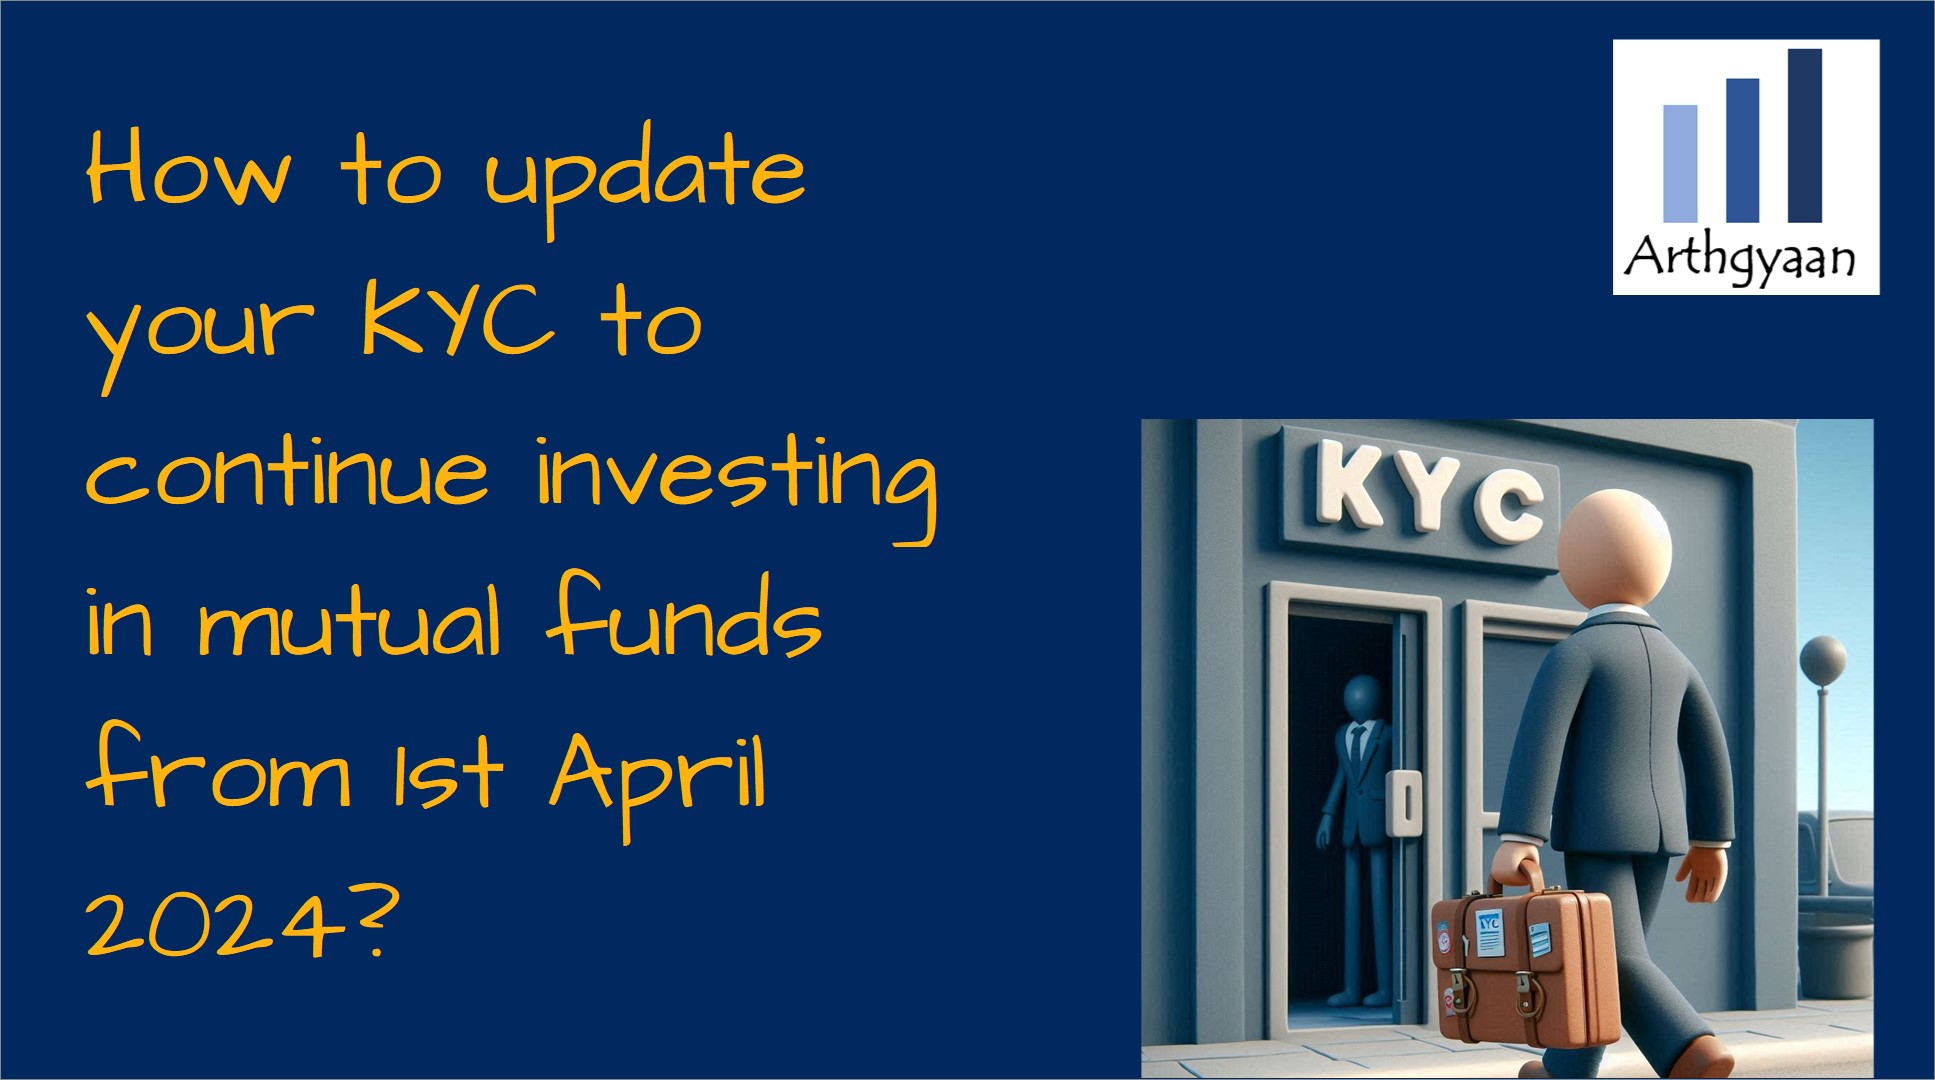 How to update your KYC to continue investing in mutual funds from 1st April 2024?